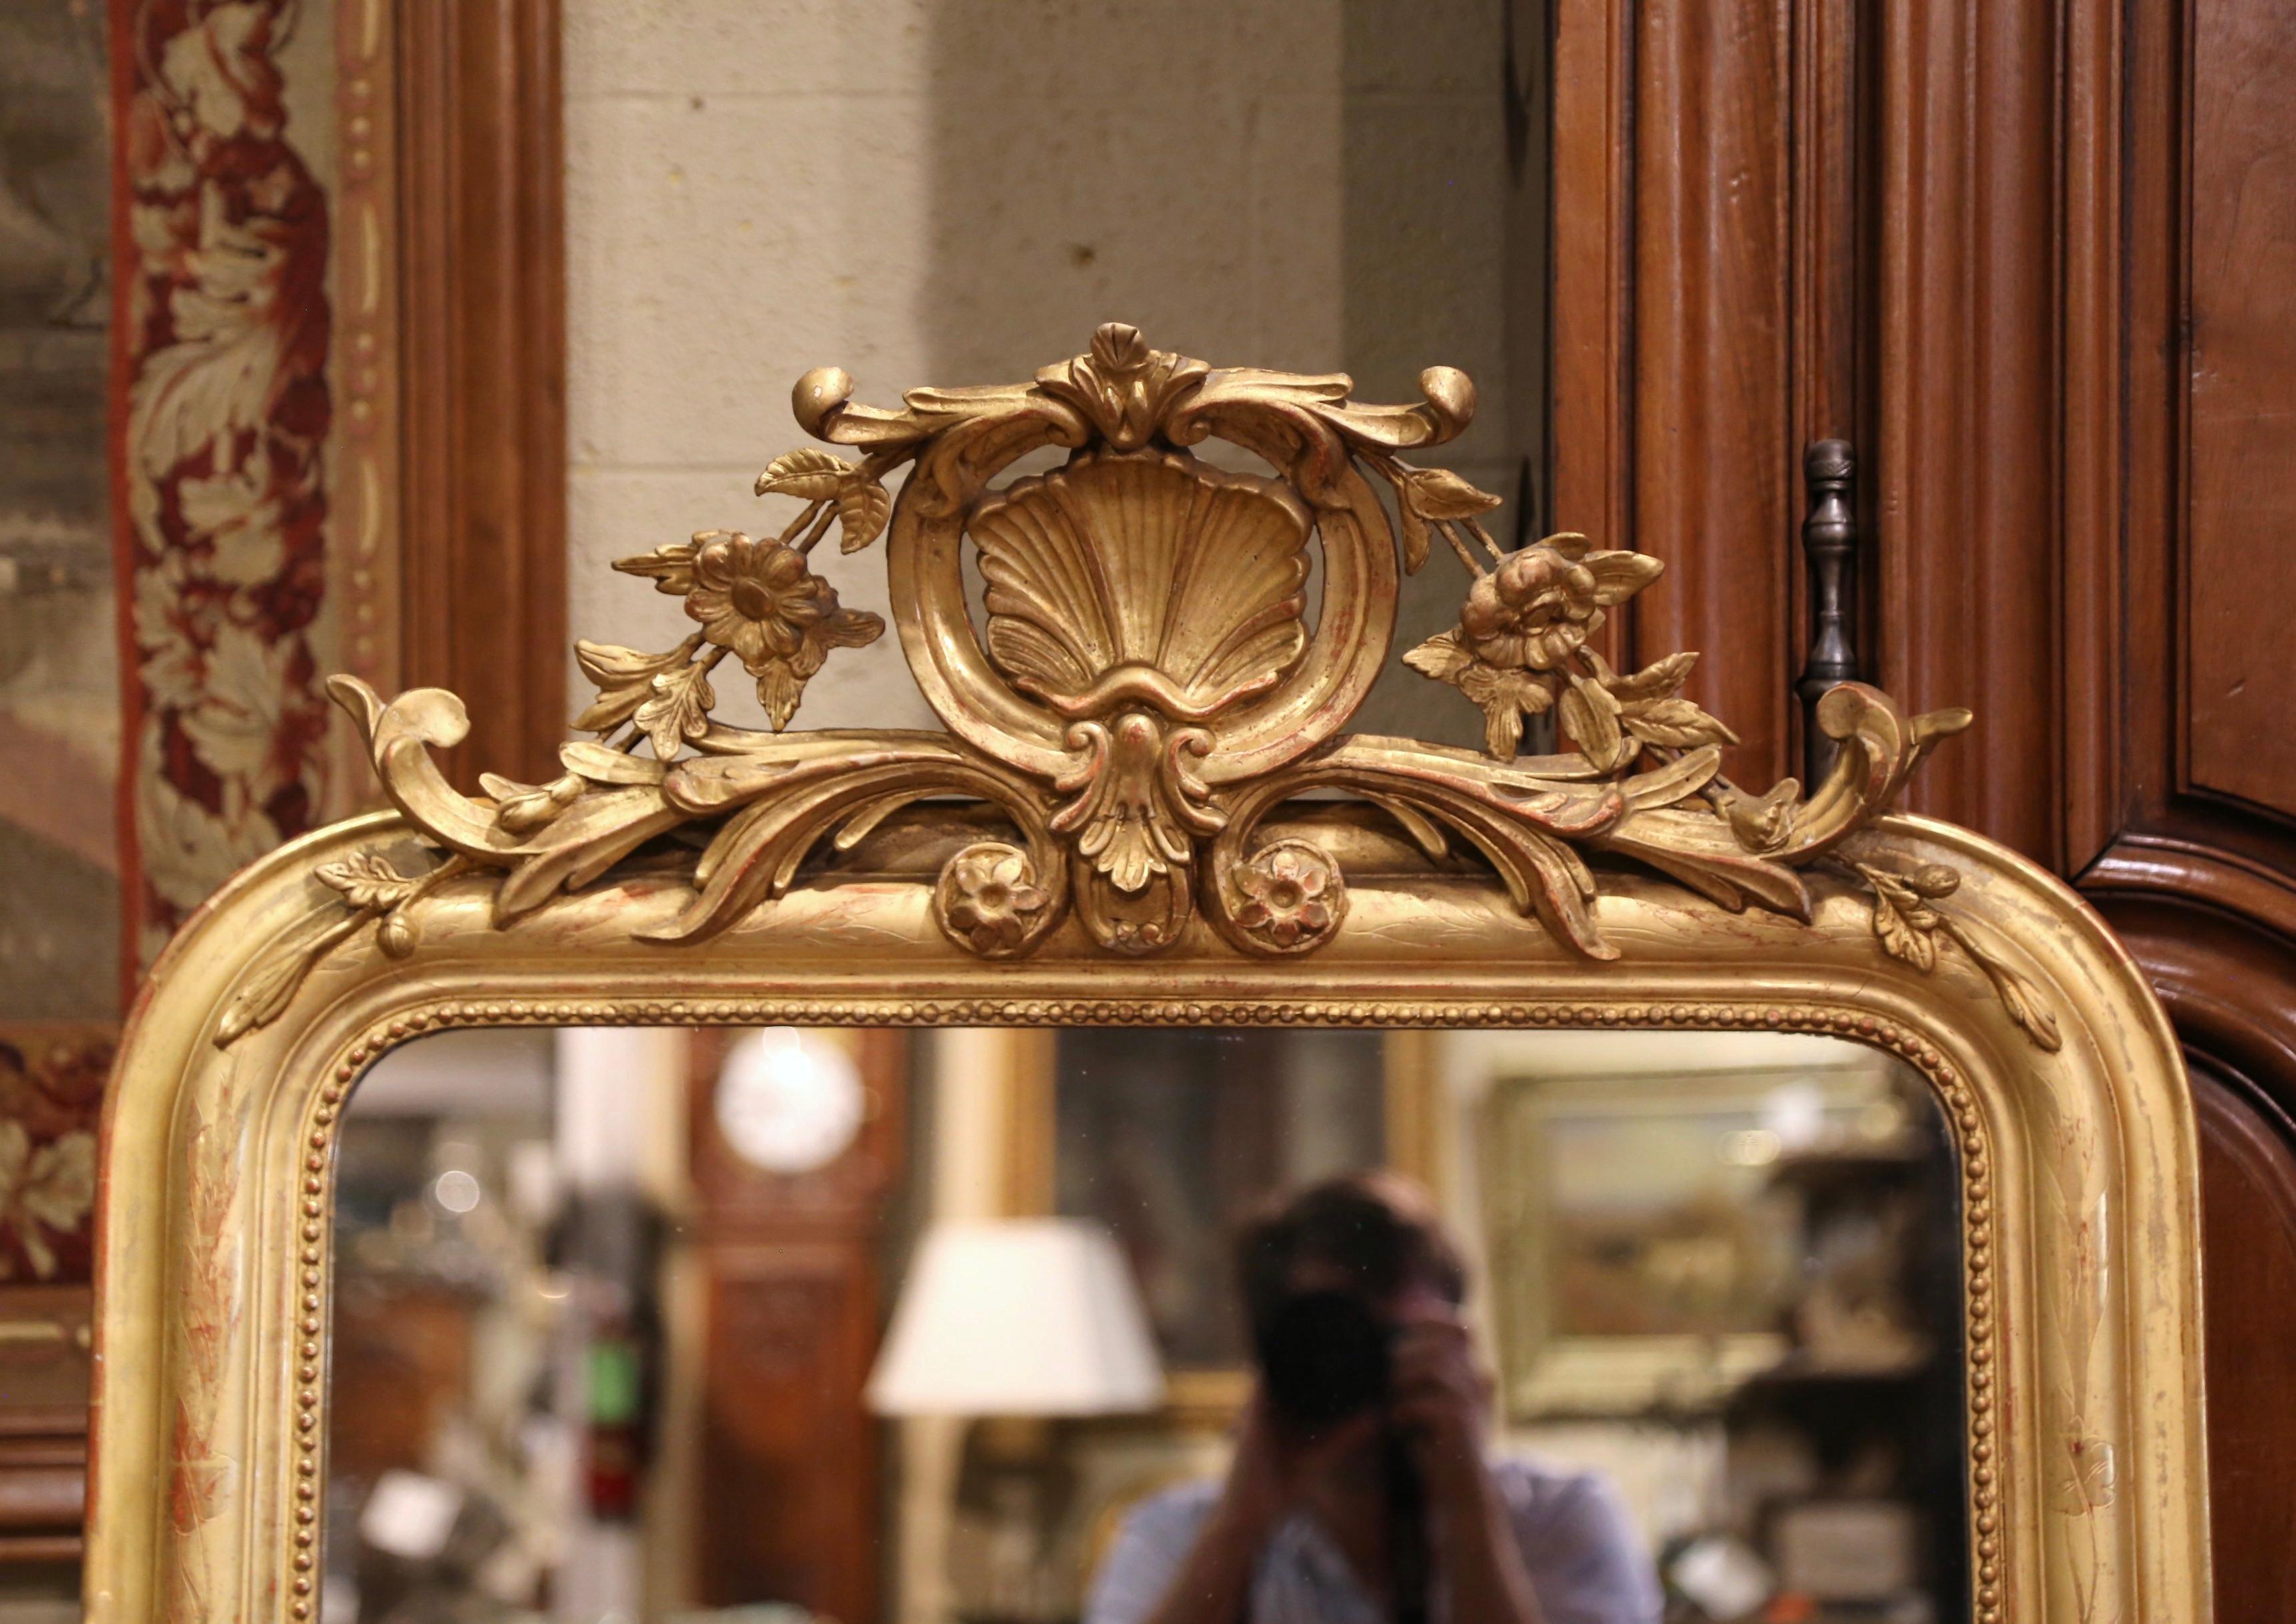 This elegant, antique wall mirror was crafted in France, circa 1870. Rectangular in shape and over five feet tall, the large mirror is decorated at the pediment with a large cartouche shell in the center flanked with carved floral and leaf motifs on